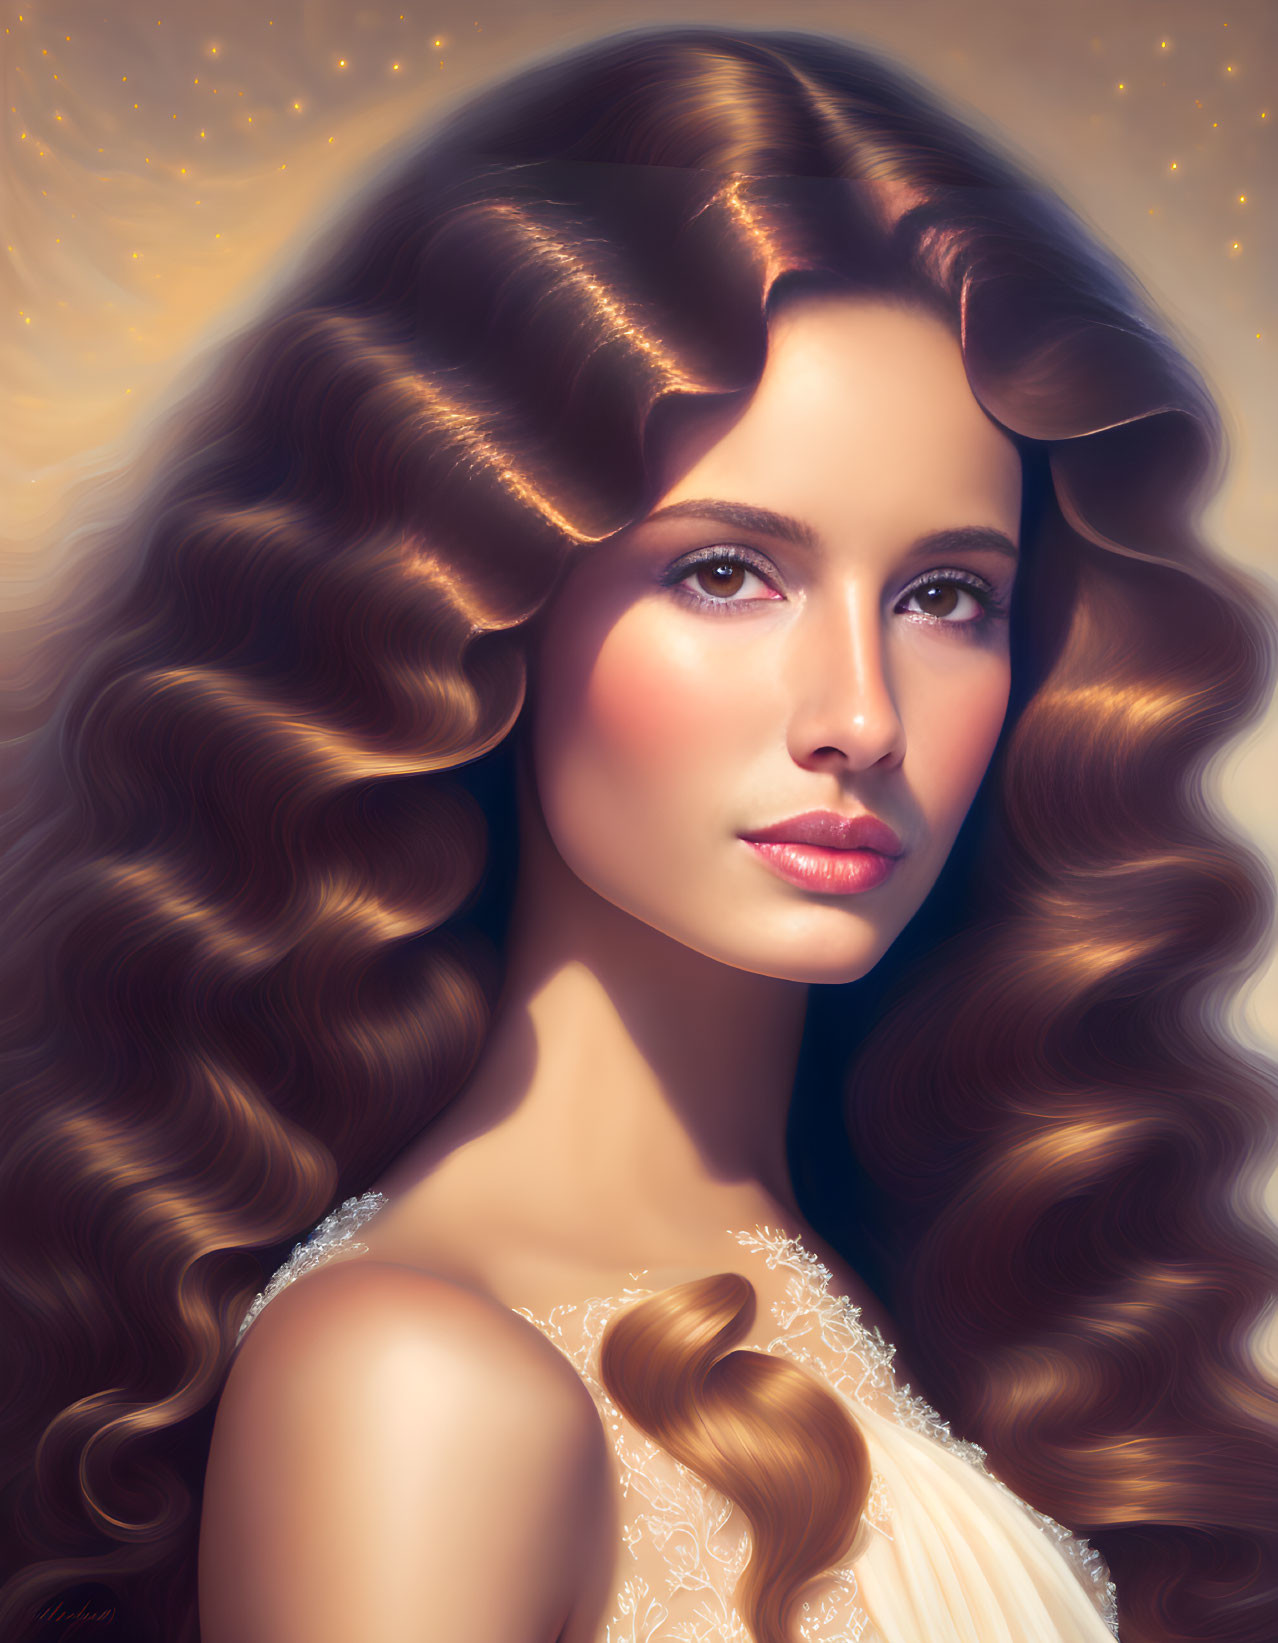 Portrait of Woman with Voluminous Wavy Brown Hair and Serene Expression